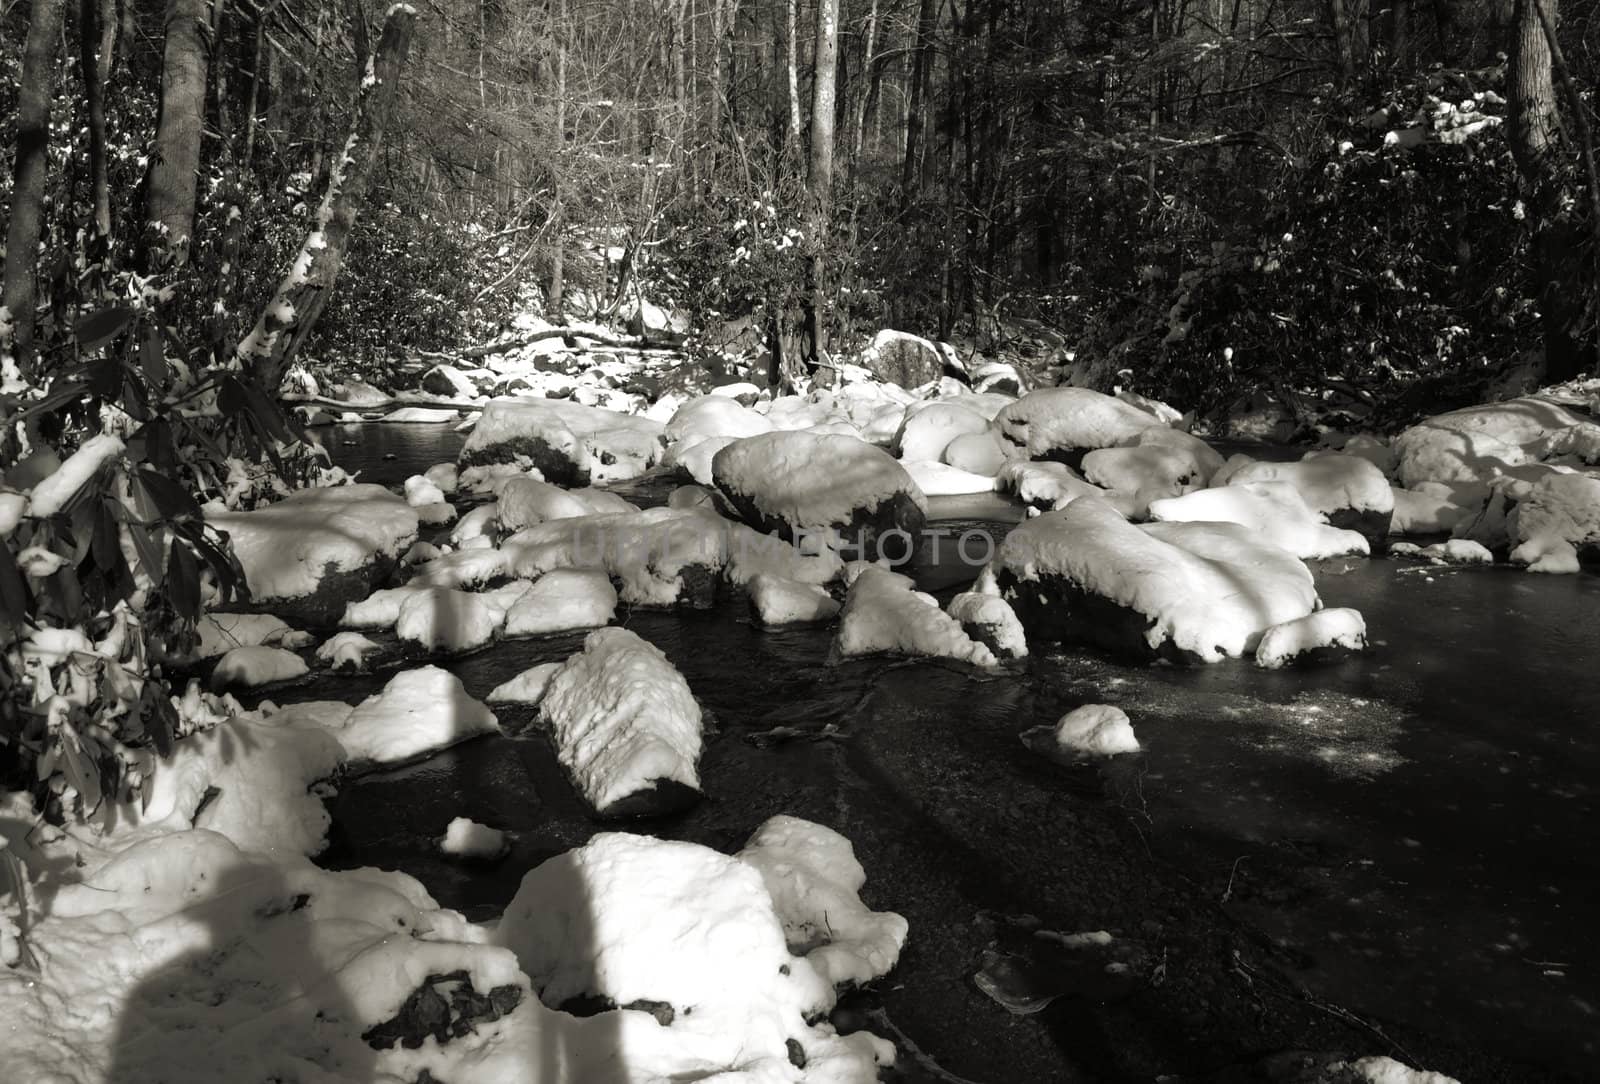 A cold river view shown in black and white